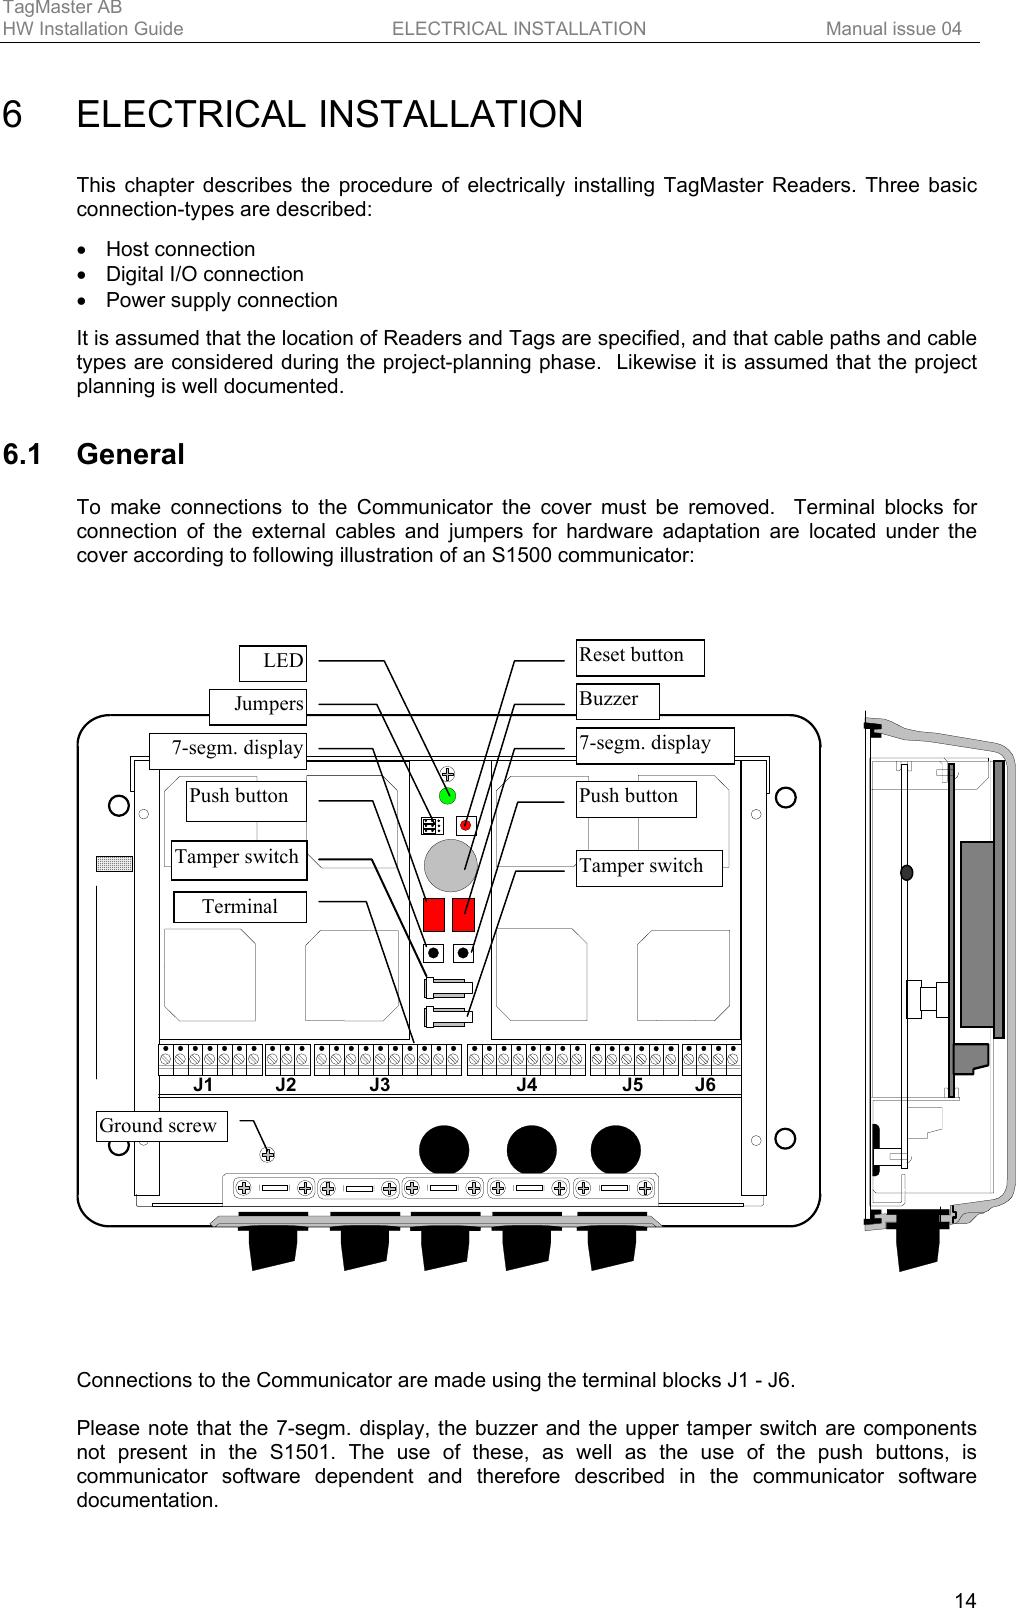 TagMaster AB     HW Installation Guide  ELECTRICAL INSTALLATION  Manual issue 04  14 6 ELECTRICAL INSTALLATION This chapter describes the procedure of electrically installing TagMaster Readers. Three basic connection-types are described:  • Host connection •  Digital I/O connection •  Power supply connection  It is assumed that the location of Readers and Tags are specified, and that cable paths and cable types are considered during the project-planning phase.  Likewise it is assumed that the project planning is well documented. 6.1 General To make connections to the Communicator the cover must be removed.  Terminal blocks for connection of the external cables and jumpers for hardware adaptation are located under the cover according to following illustration of an S1500 communicator:    J1 J2 J3 J4 J5 J6Reset button7-segm. displayBuzzerPush buttonJumpersLEDTerminal7-segm. displayPush buttonTamper switchGround screwTamper switch     Connections to the Communicator are made using the terminal blocks J1 - J6.  Please note that the 7-segm. display, the buzzer and the upper tamper switch are components not present in the S1501. The use of these, as well as the use of the push buttons, is communicator software dependent and therefore described in the communicator software documentation.  